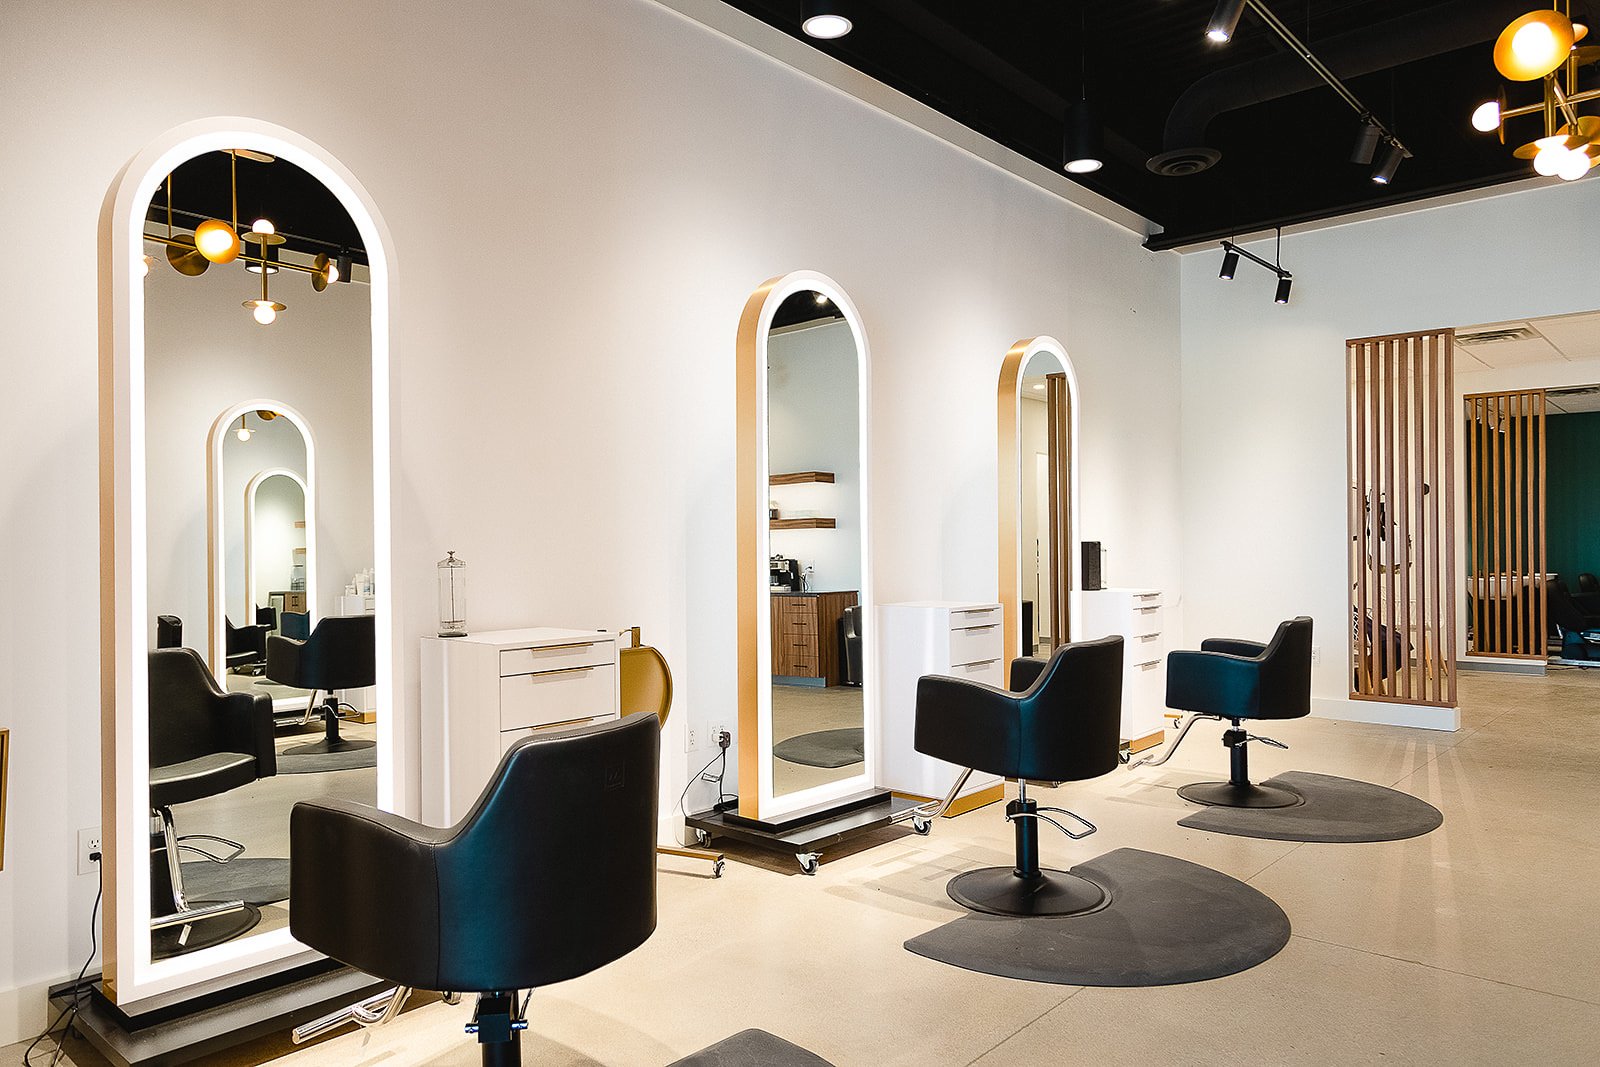 LB Extensions || Indianapolis's Luxury Extension and Color Salon